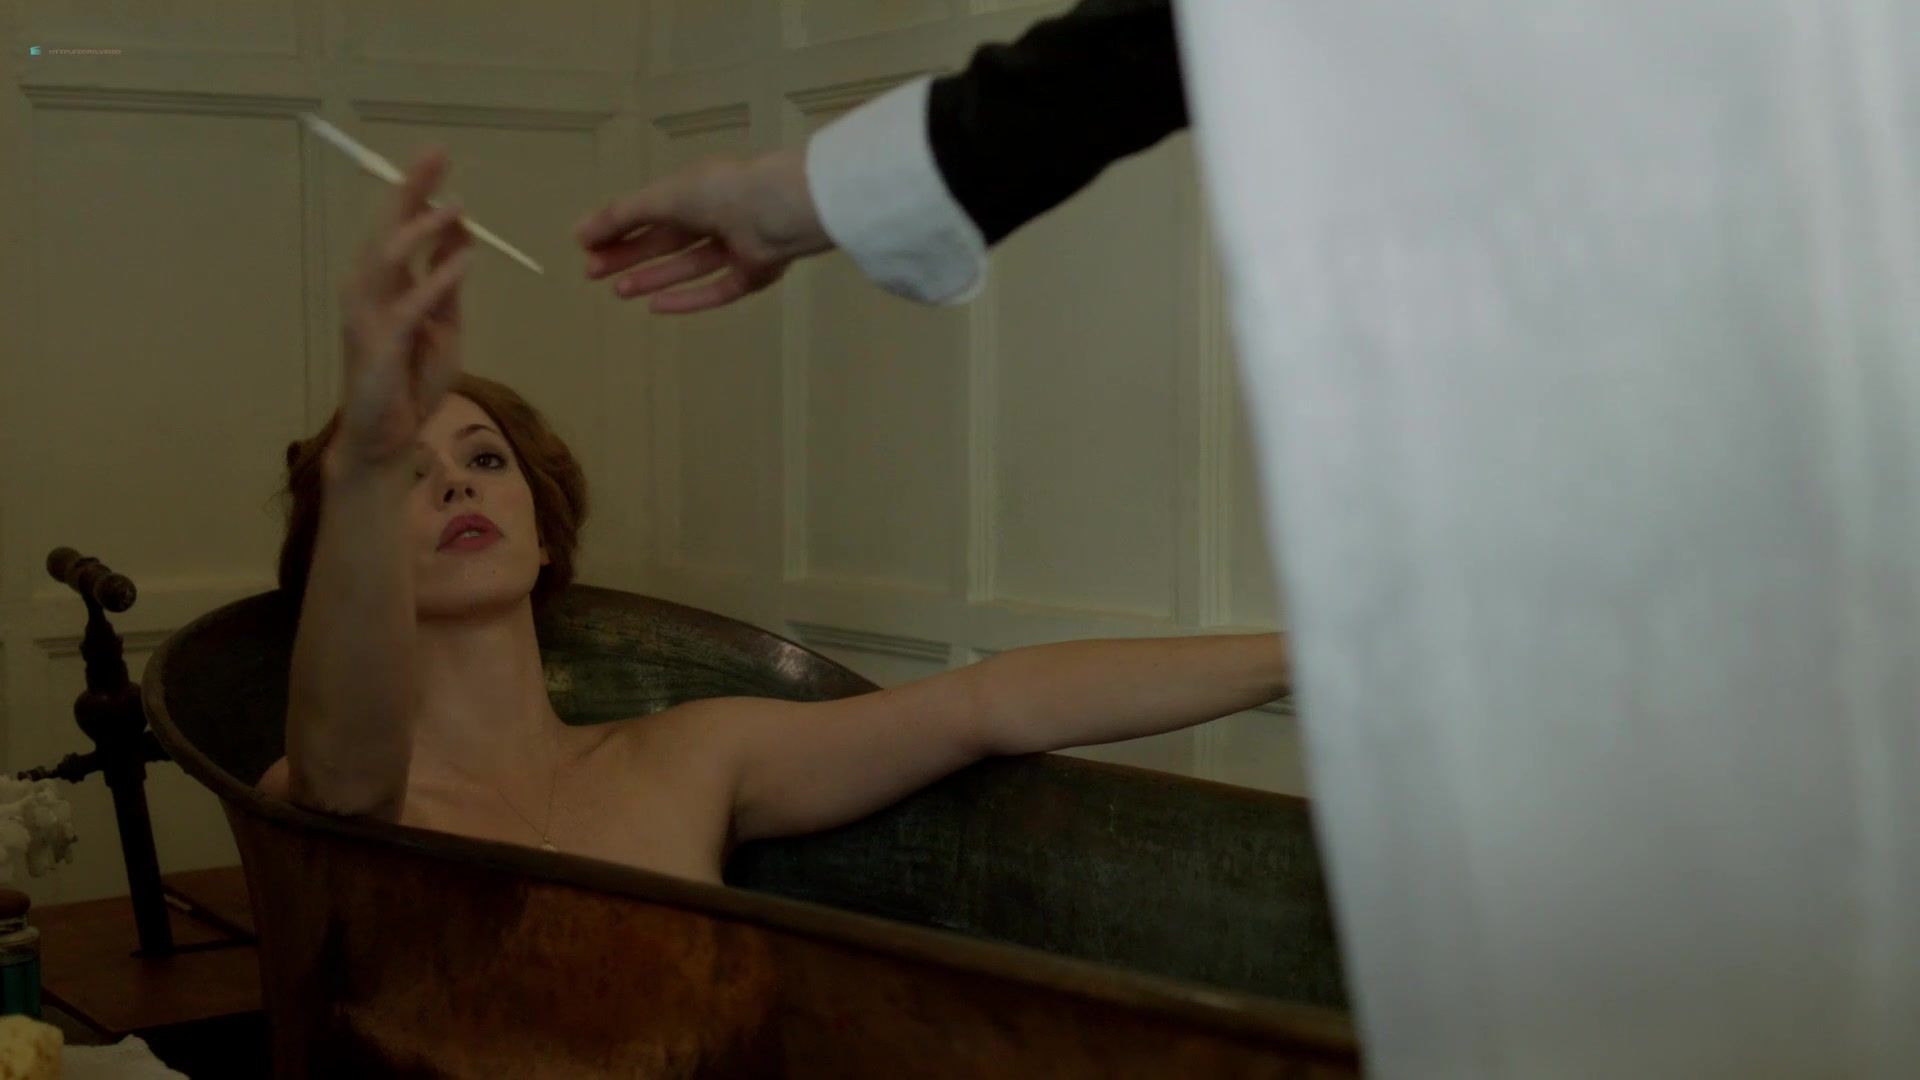 Anal Play Rebecca Hall, Adelaide Clemens nude - Parades End (2012) Pururin - 1